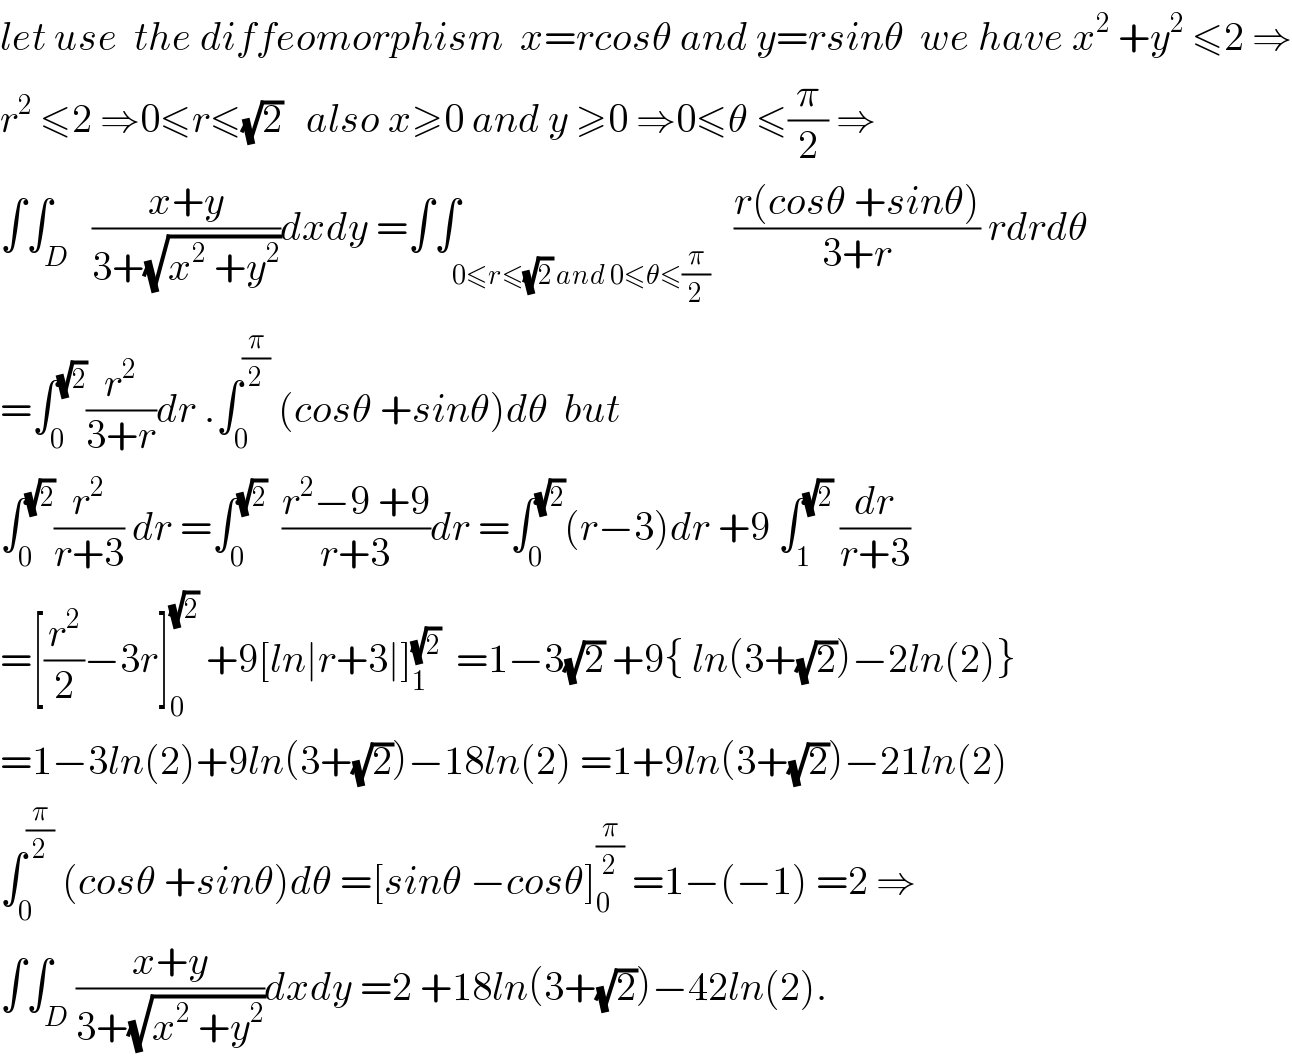 let use  the diffeomorphism  x=rcosθ and y=rsinθ  we have x^2  +y^2  ≤2 ⇒  r^2  ≤2 ⇒0≤r≤(√2)   also x≥0 and y ≥0 ⇒0≤θ ≤(π/2) ⇒  ∫∫_D   ((x+y)/(3+(√(x^2  +y^2 ))))dxdy =∫∫_(0≤r≤(√2) and 0≤θ≤(π/2))   ((r(cosθ +sinθ))/(3+r)) rdrdθ  =∫_0 ^(√2) (r^2 /(3+r))dr .∫_0 ^(π/2)  (cosθ +sinθ)dθ  but  ∫_0 ^(√2) (r^2 /(r+3)) dr =∫_0 ^(√2)   ((r^2 −9 +9)/(r+3))dr =∫_0 ^(√2) (r−3)dr +9 ∫_1 ^(√2)  (dr/(r+3))  =[(r^2 /2)−3r]_0 ^(√2)  +9[ln∣r+3∣]_1 ^(√2)   =1−3(√2) +9{ ln(3+(√2))−2ln(2)}  =1−3ln(2)+9ln(3+(√2))−18ln(2) =1+9ln(3+(√2))−21ln(2)  ∫_0 ^(π/2)  (cosθ +sinθ)dθ =[sinθ −cosθ]_0 ^(π/2)  =1−(−1) =2 ⇒  ∫∫_D ((x+y)/(3+(√(x^2  +y^2 ))))dxdy =2 +18ln(3+(√2))−42ln(2).  